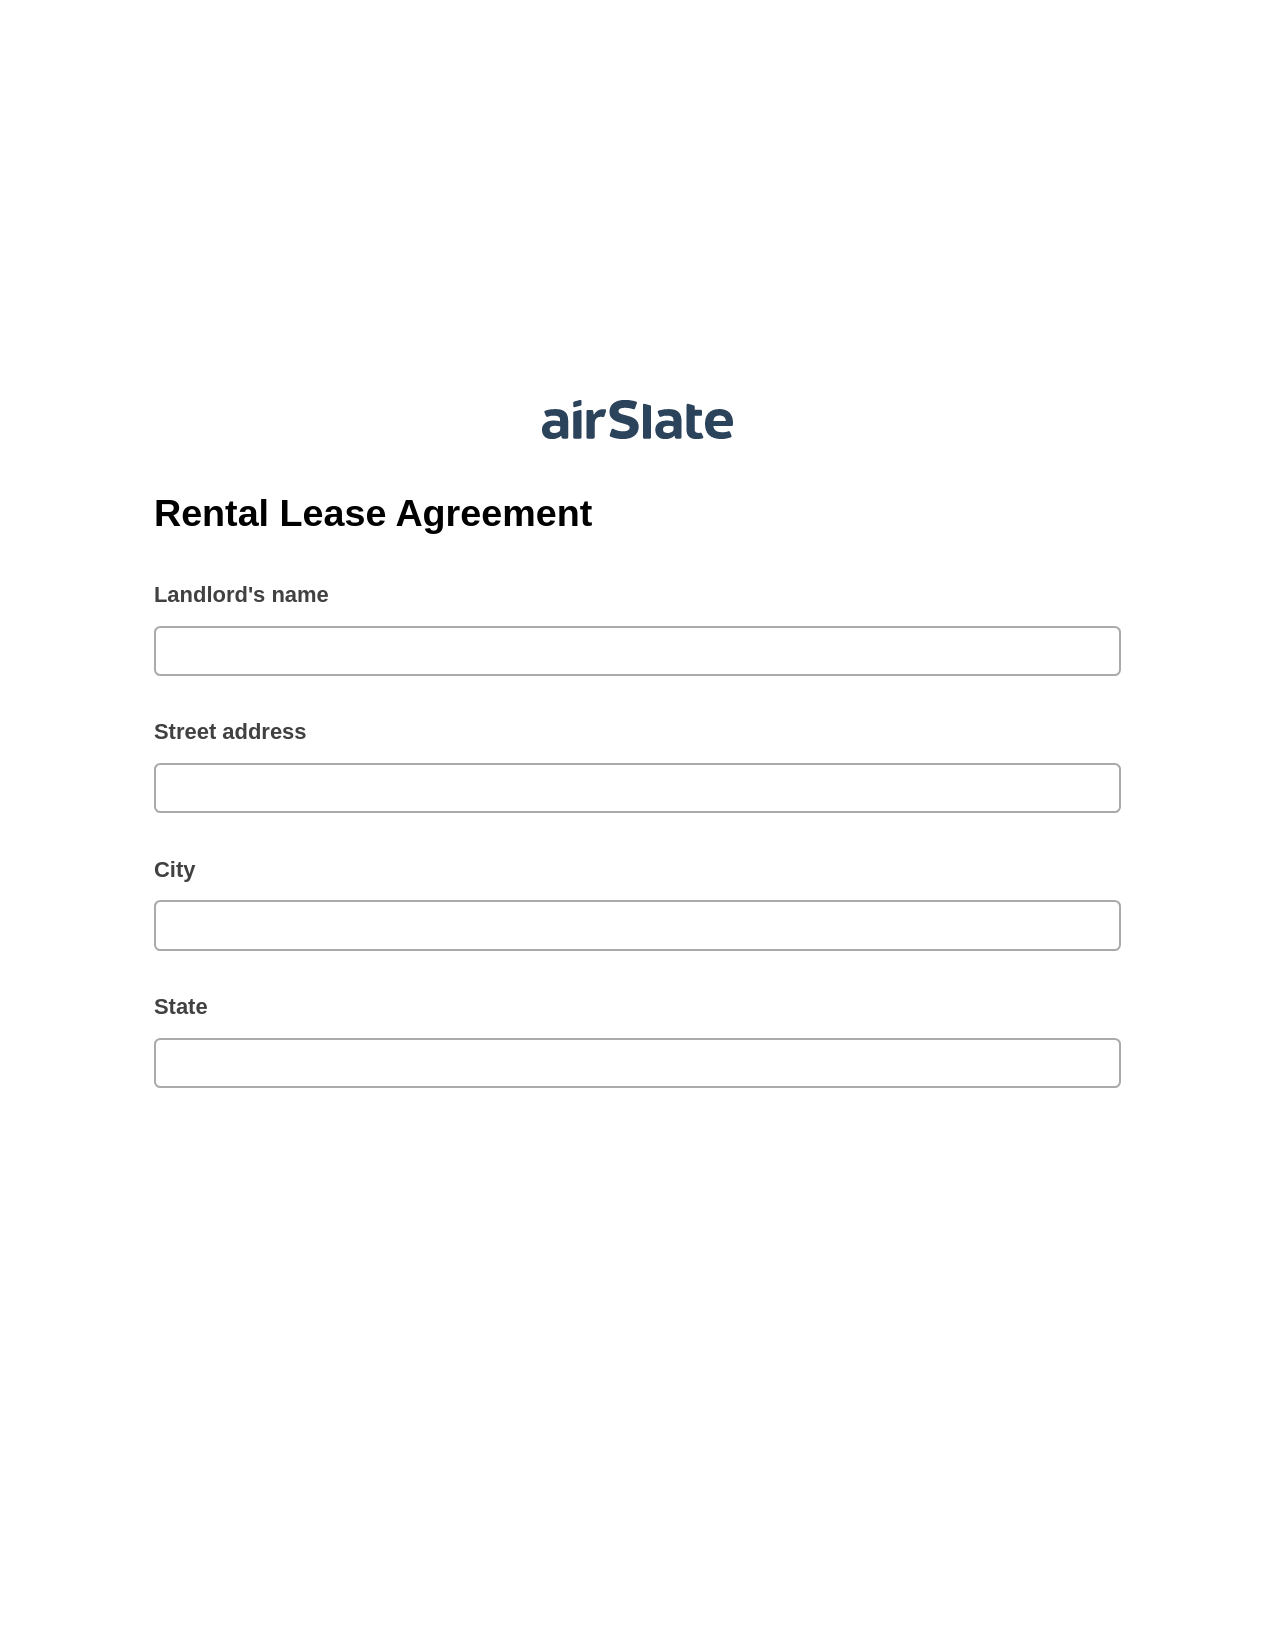 Rental Lease Agreement Pre-fill from Salesforce Records with SOQL Bot, Google Cloud Print Bot, Post-finish Document Bot